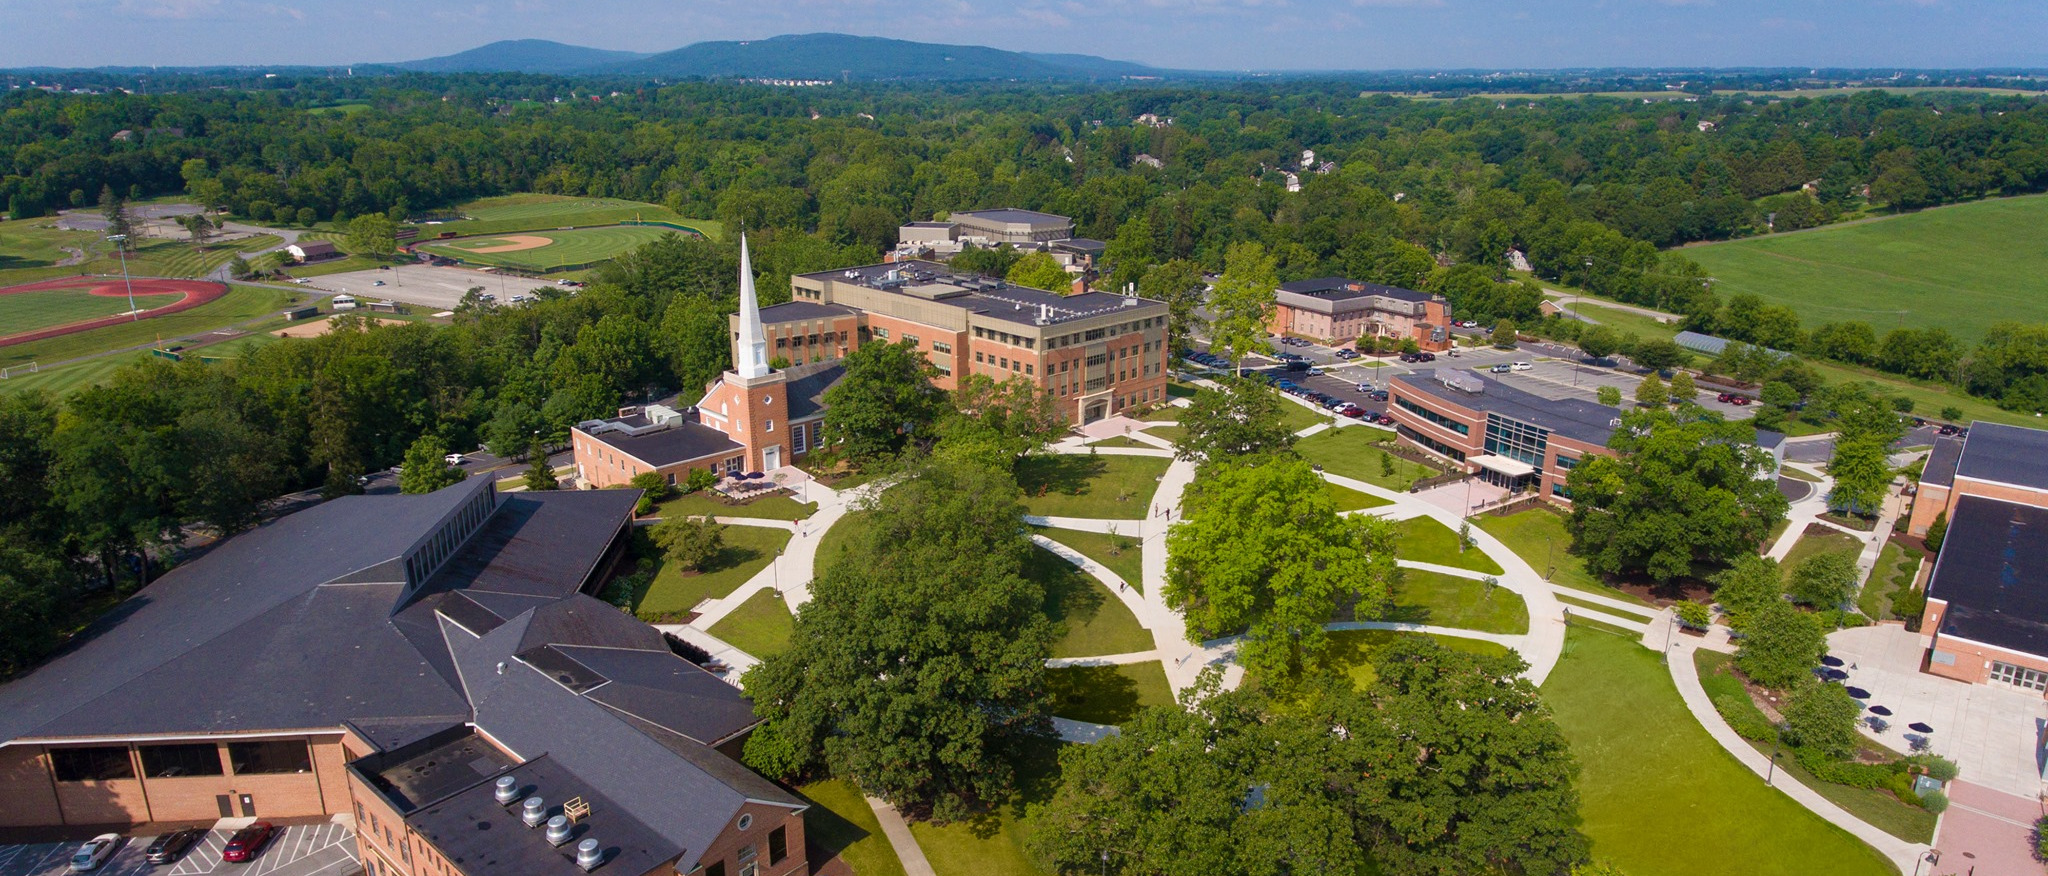 Aerial view of campus green